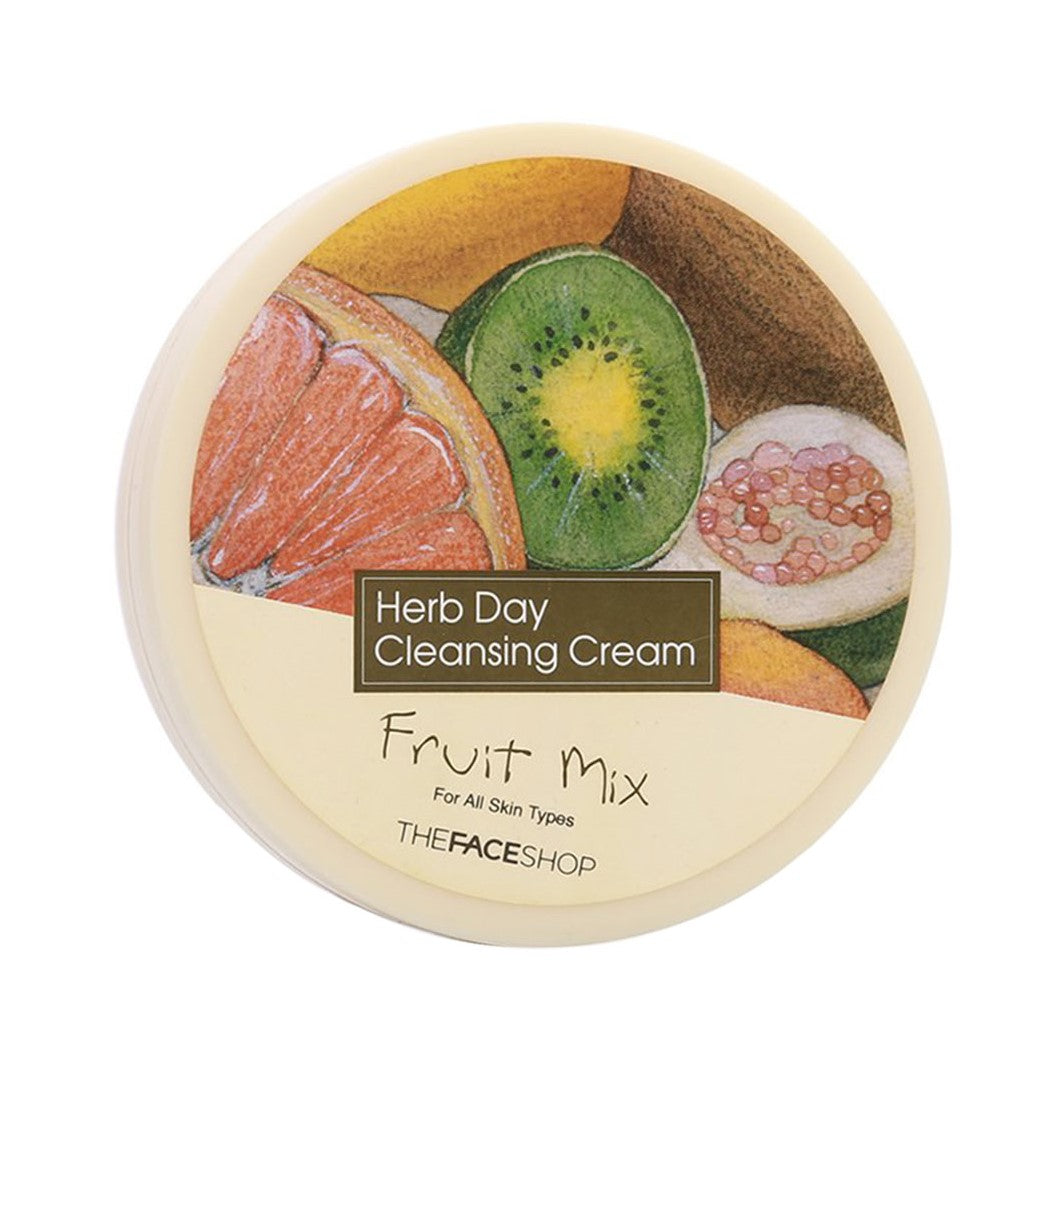 THE FACESHOP Herb Day Cleansing Cream Fruitmix - Misumi Cosmetics Nepal